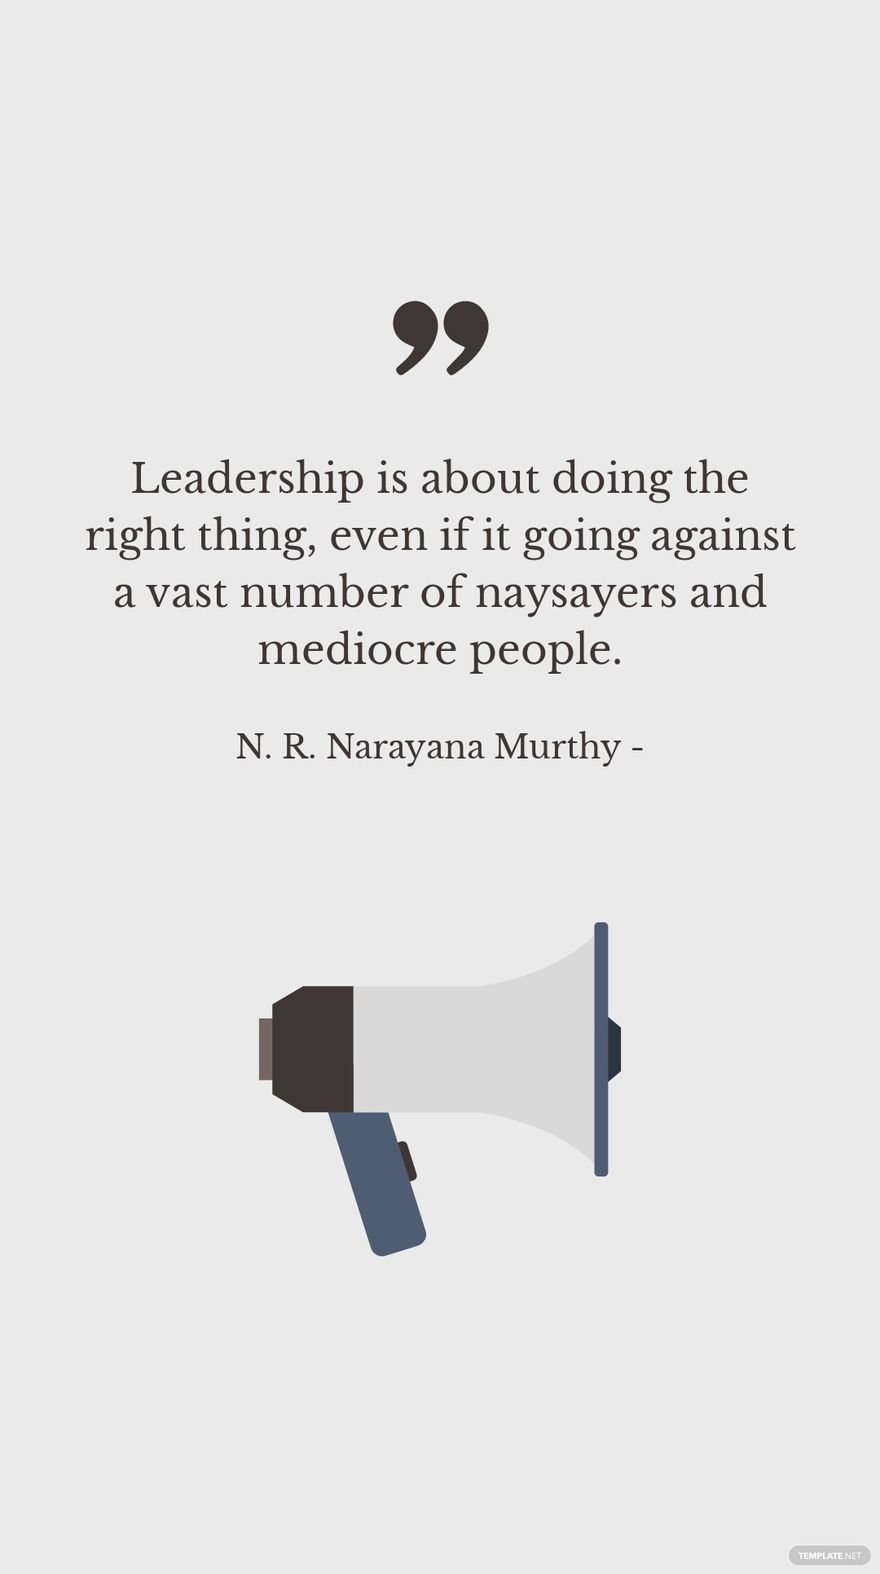 Free N. R. Narayana Murthy - Leadership is about doing the right thing, even if it going against a vast number of naysayers and mediocre people.